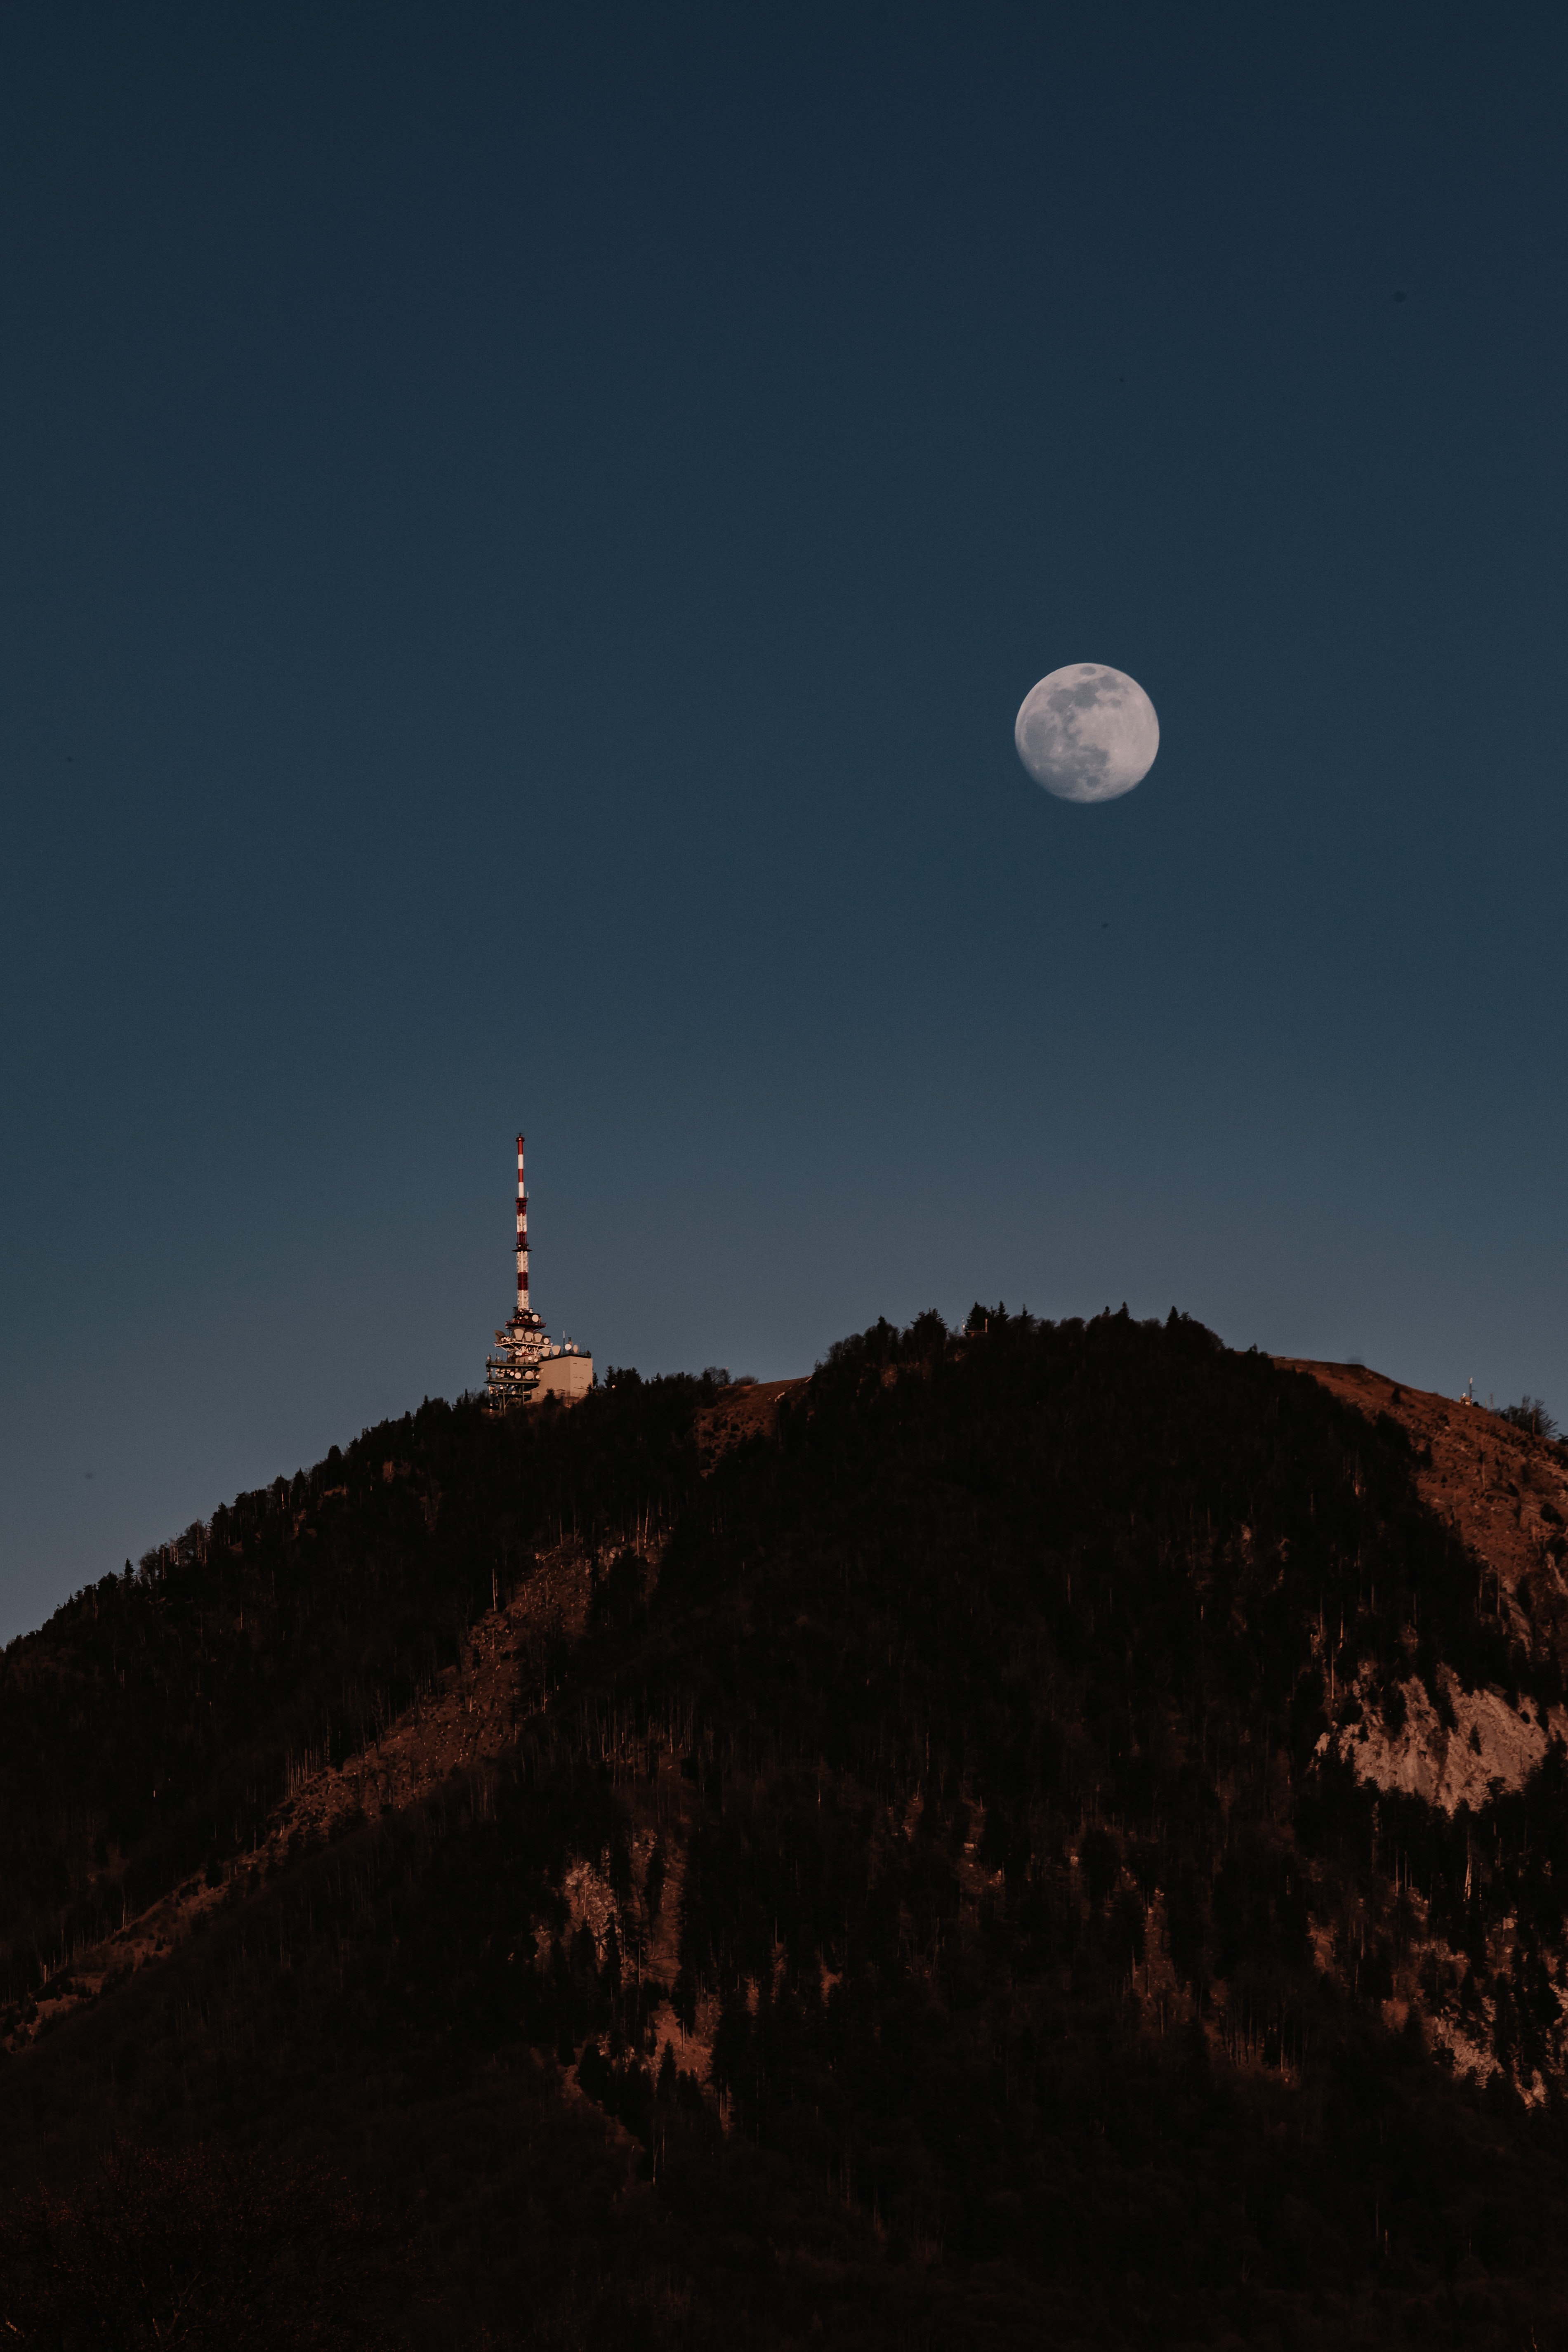 hill, nature, trees, moon, tower